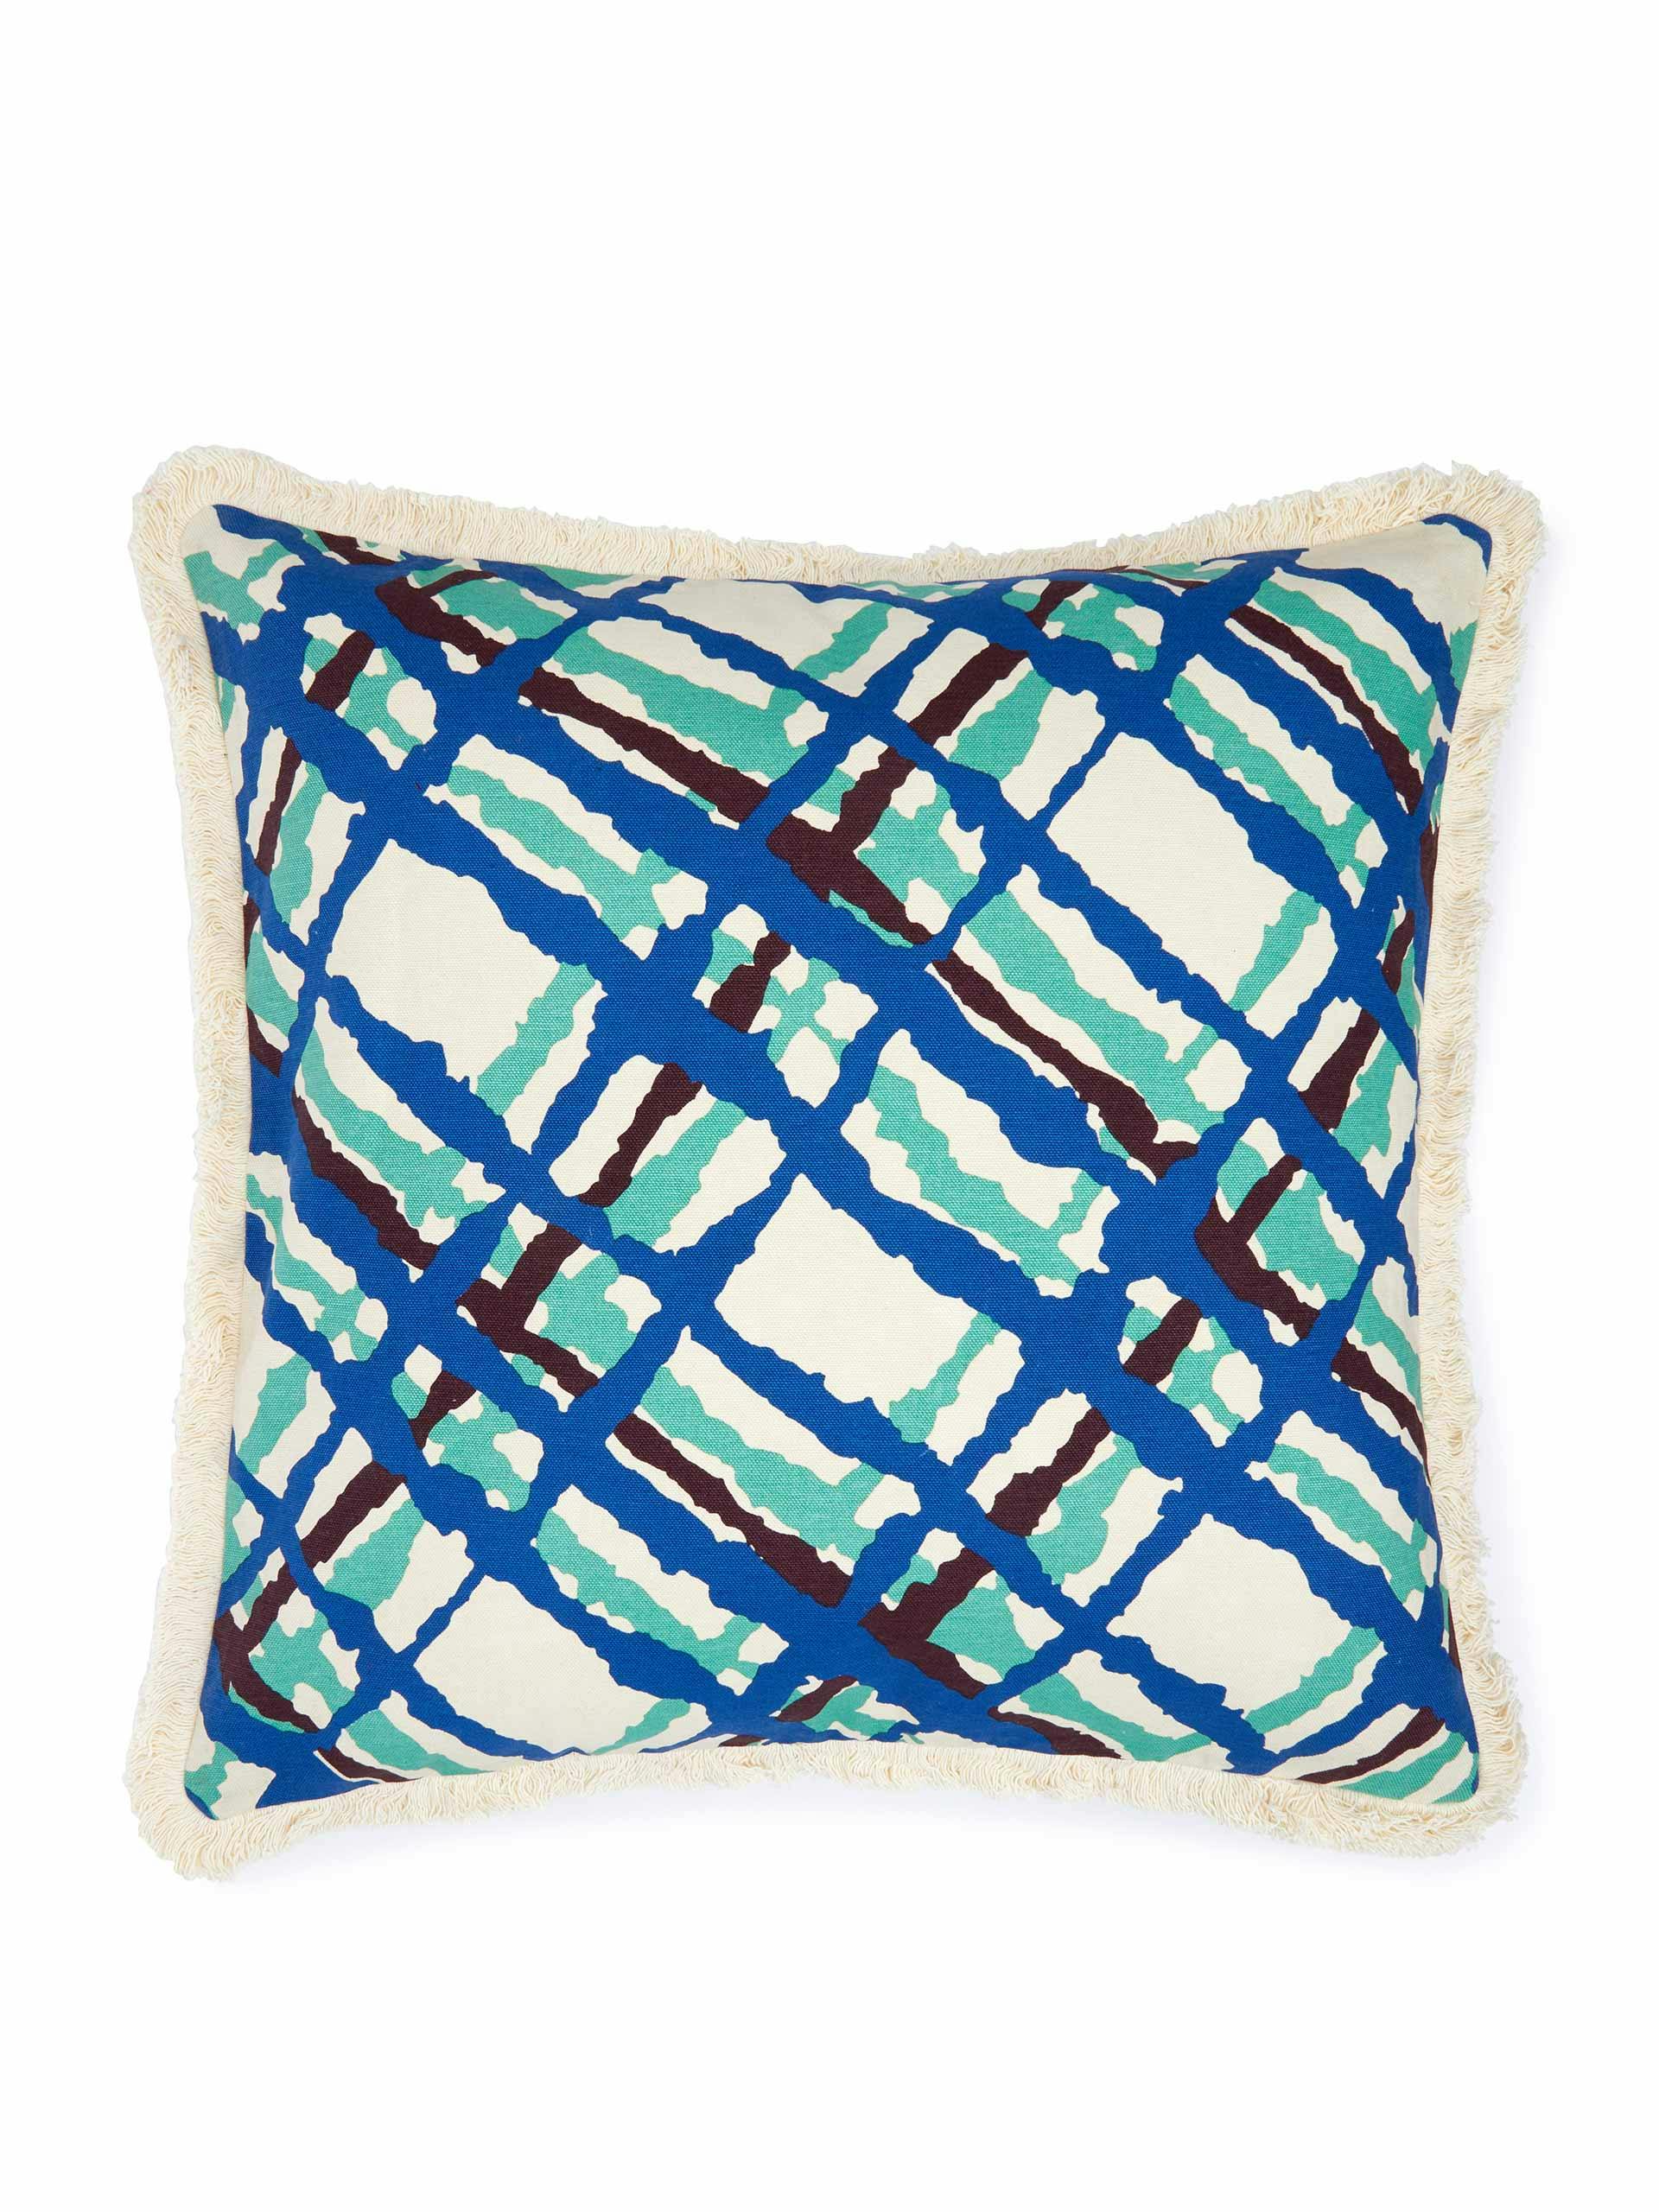 Jade ink check patterned cushion cover